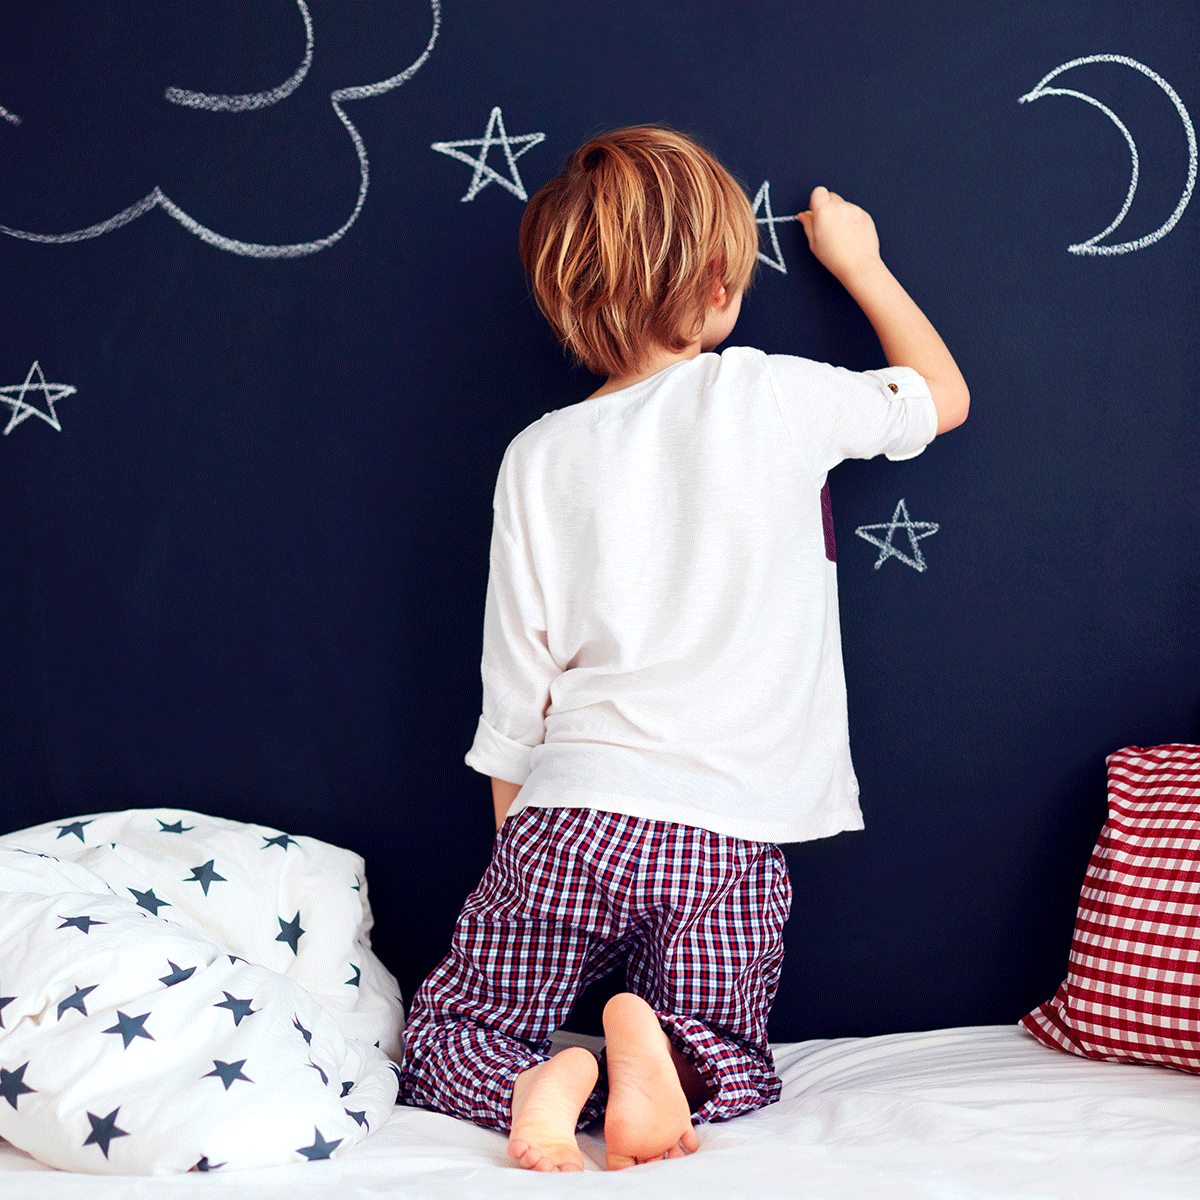 5 Things to Consider Before Painting a Chalkboard Wall